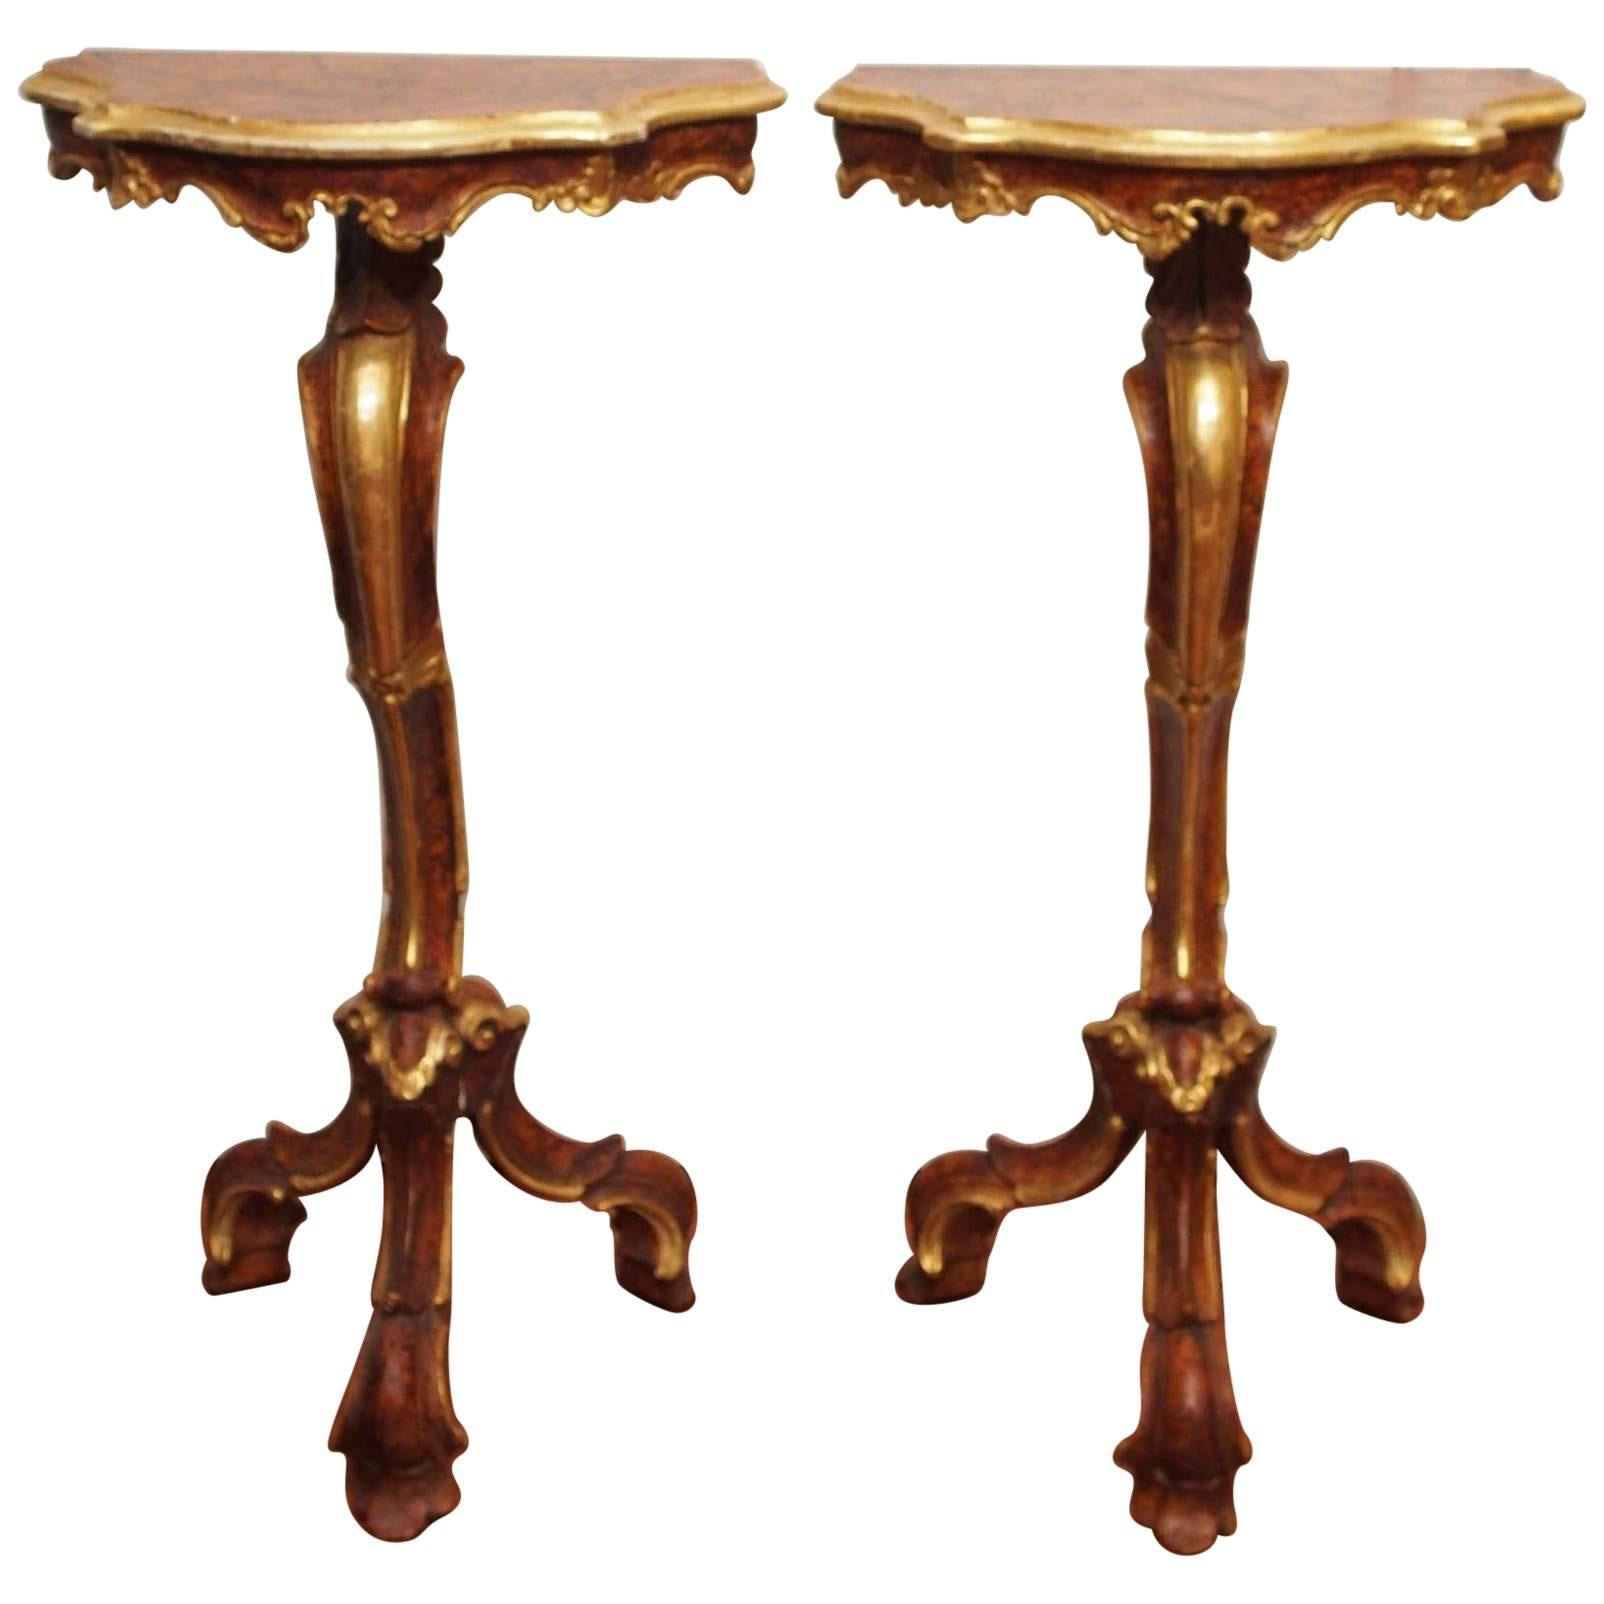 Pair of Louis XV Italian Sellette Painted and Parcel-Gilt